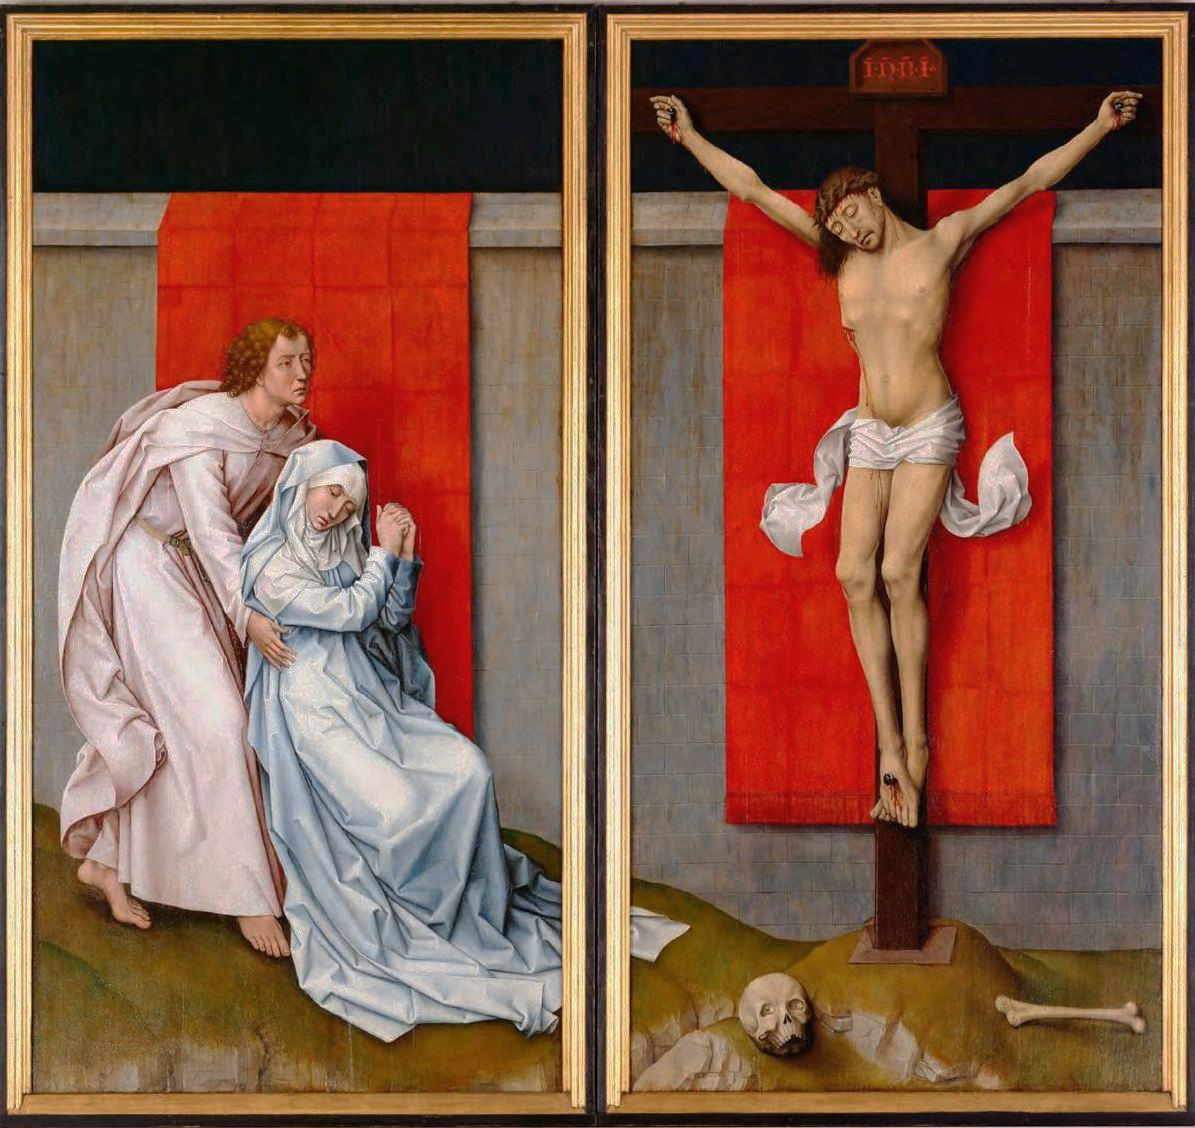 Rogier van der Weyden, The Crucifixion, with the Virgin and Saint John the Evangelist Mourning, c. 1460, oil on panel, 71 x 73-3/8 inches / 180.3 x 186.4 cm (Philadelphia Museum of Art)